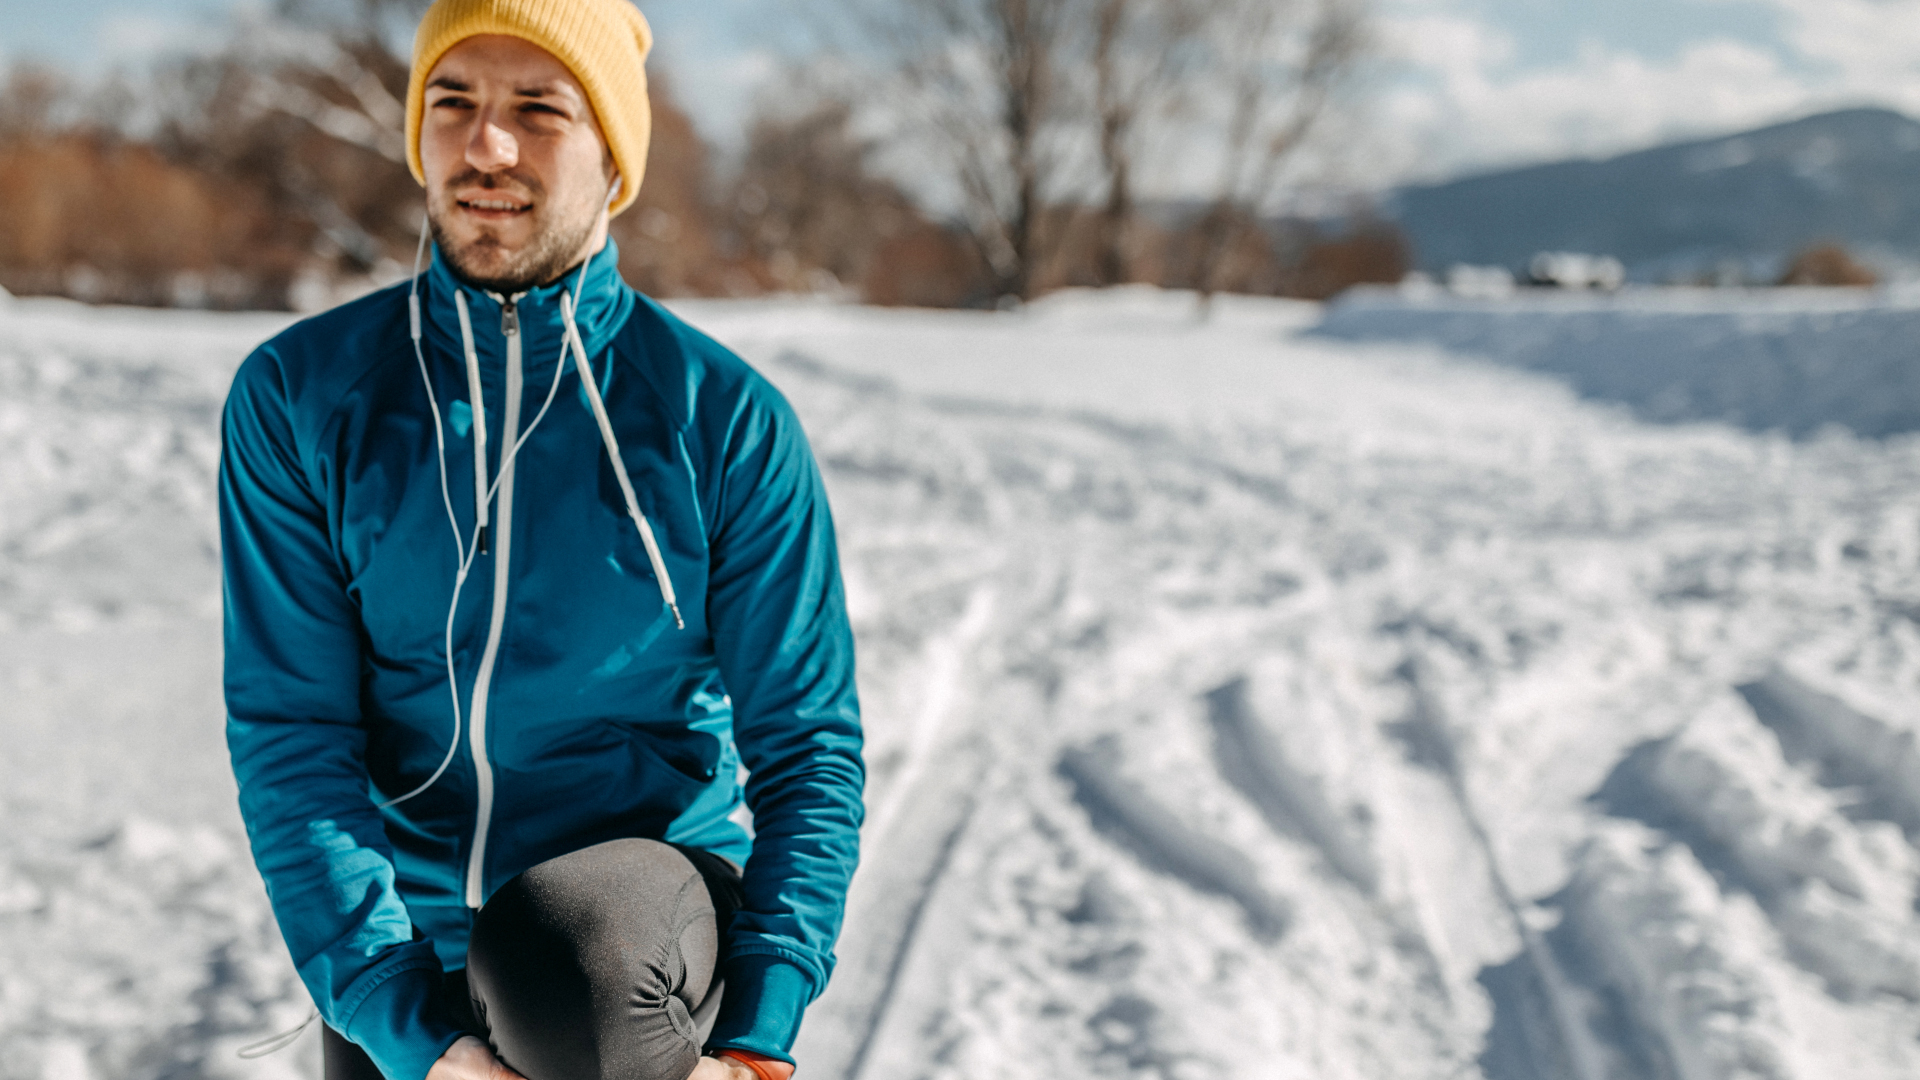 Tired of the treadmill? Get out in the cold and run, but be prepared